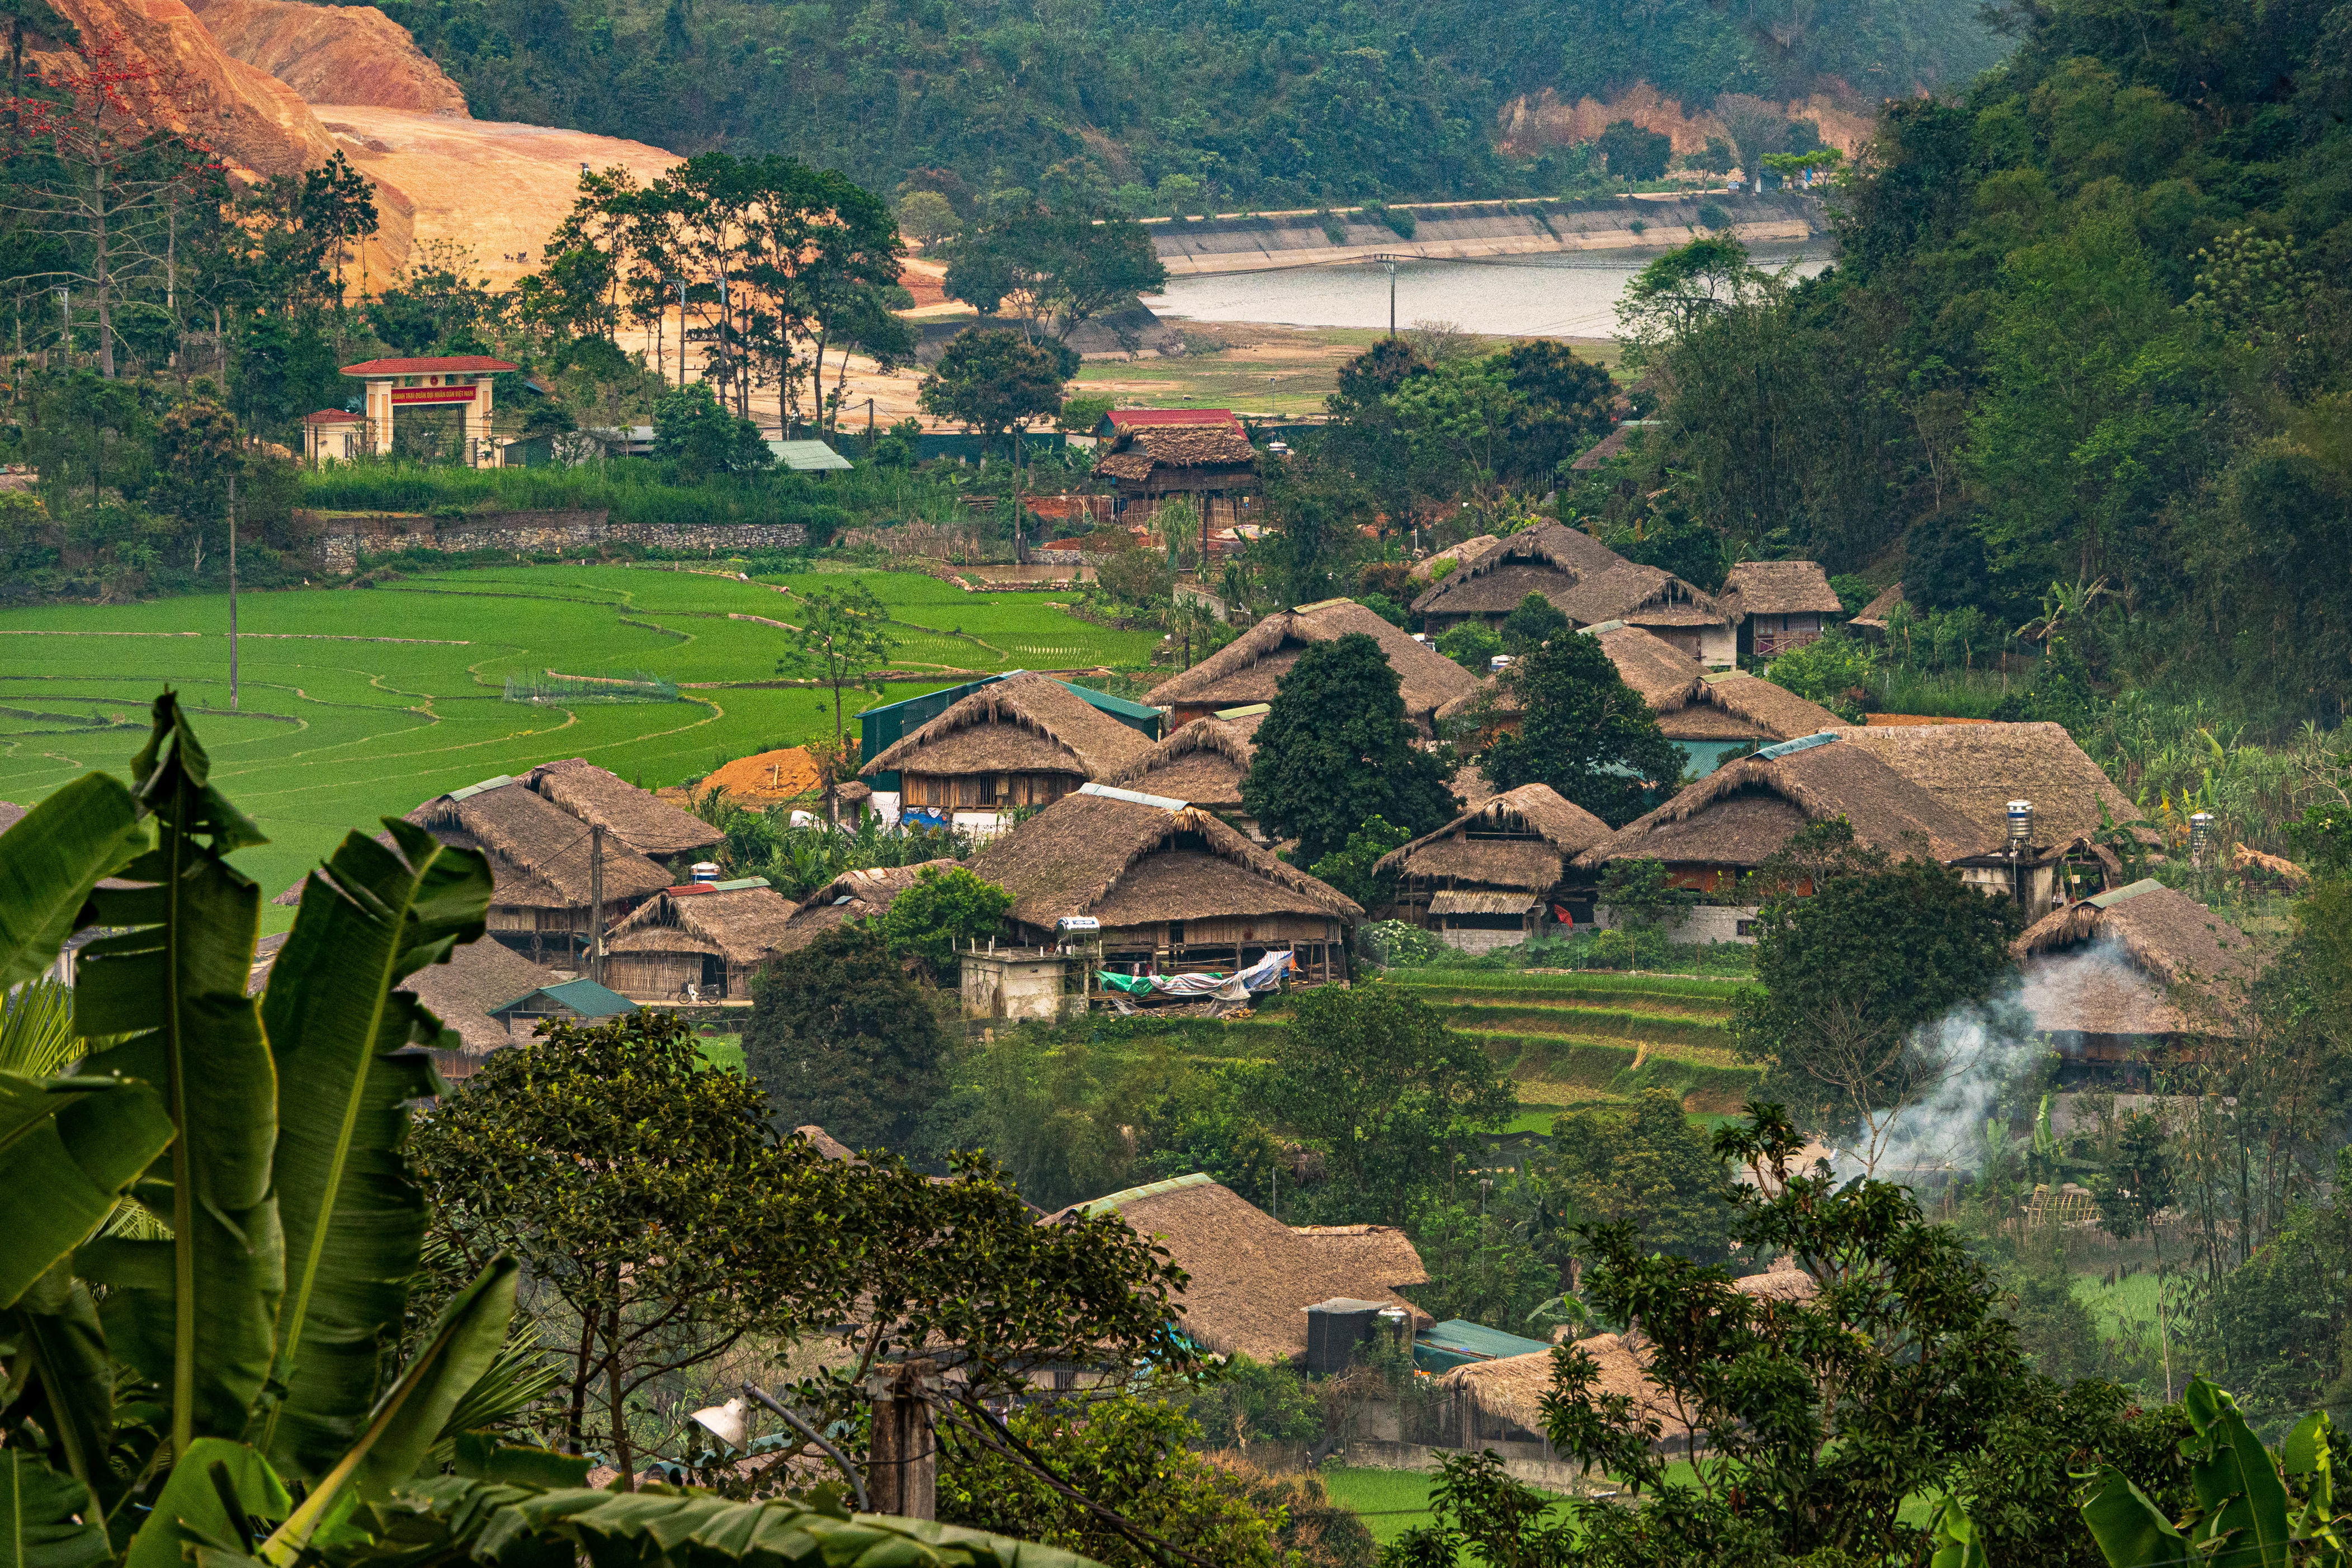 Home to the Tay people, Thôn Tha is a picturesque village in the Hà Giang province of northern Vietnam. Due to the proximity to the local rice fields, the village’s homes are built on stilts and feature thatched roofs. Villagers open their homes for homestays, where travelers can experience the culture and help support the local traditions.<p>Sign up for our newsletter to get the latest in design, decorating, celebrity style, shopping, and more.</p><a href="https://www.architecturaldigest.com/newsletter/subscribe?sourceCode=msnsend">Sign Up Now</a>